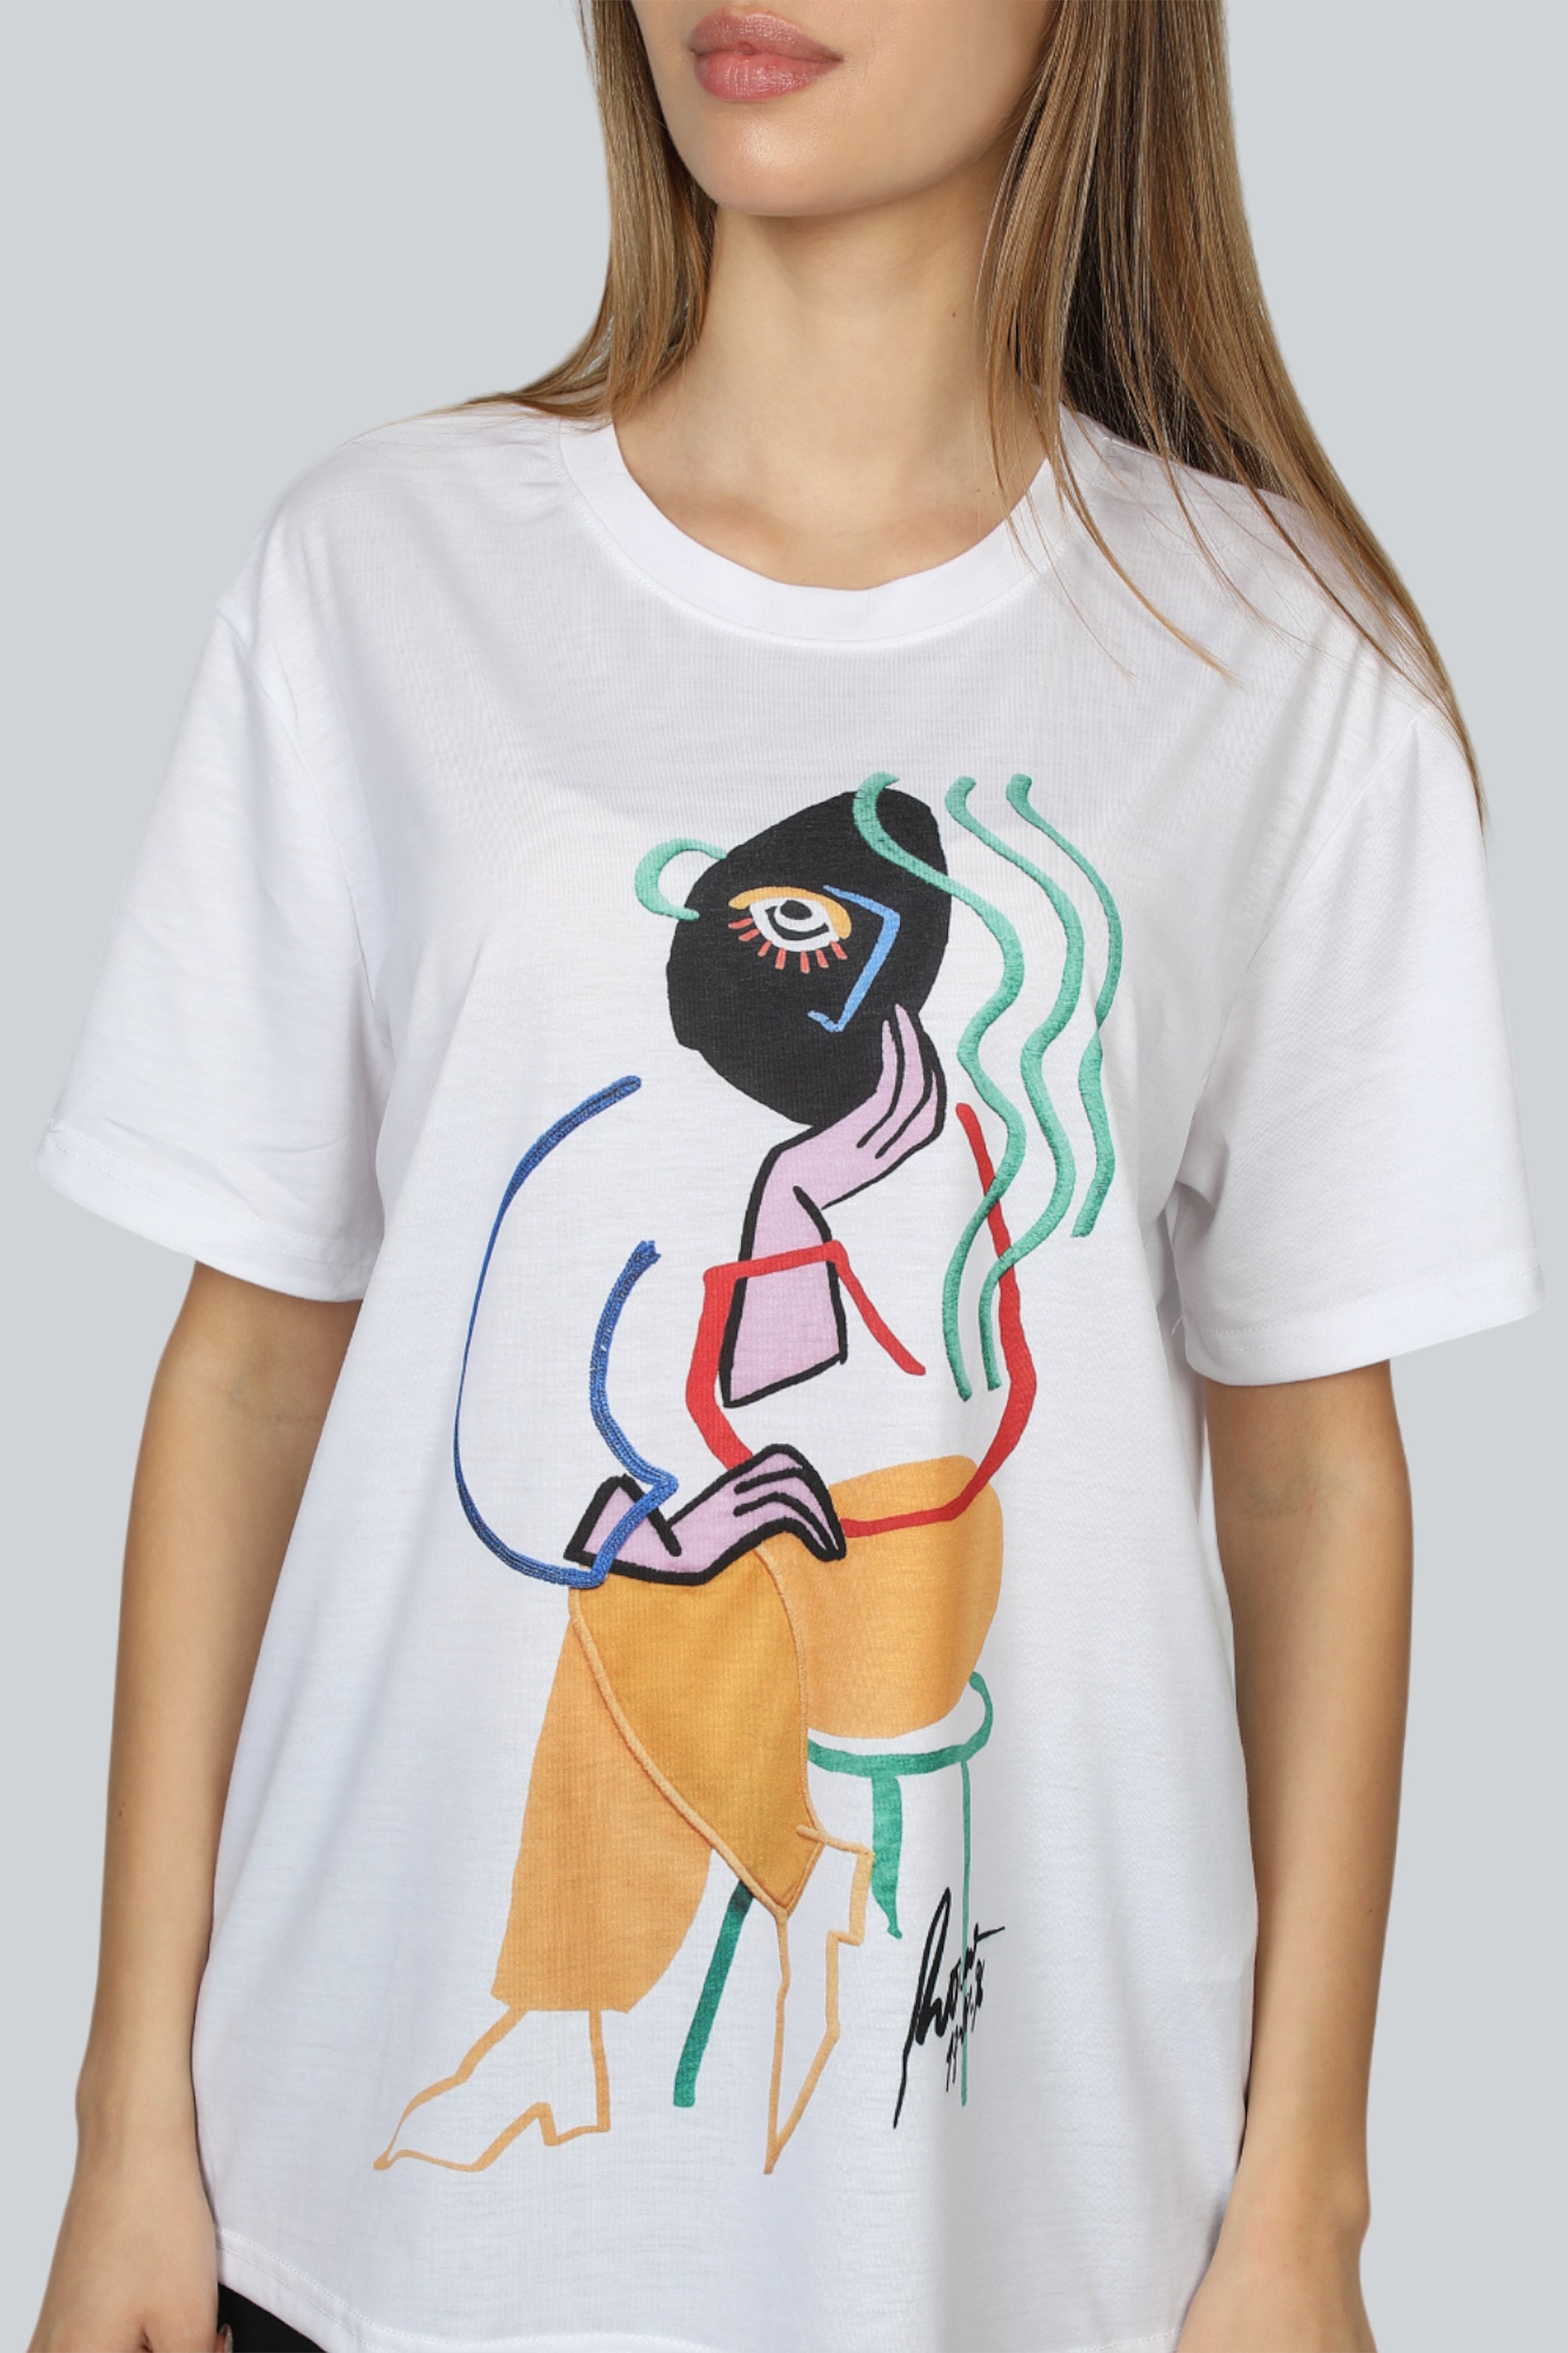 White Women T-shirt With Printed Design